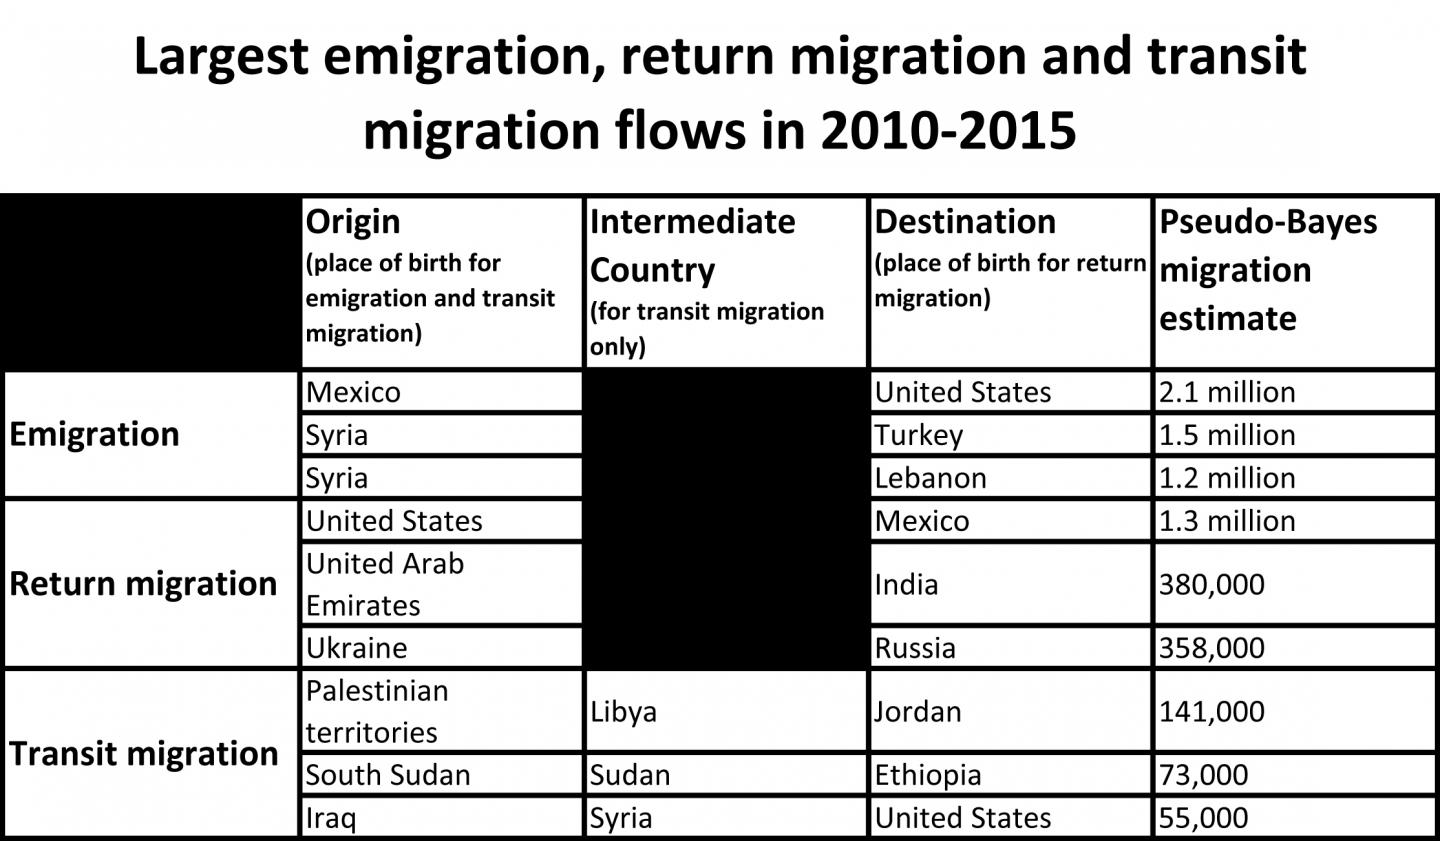 Table of Top Migration Flows, 2010-2015